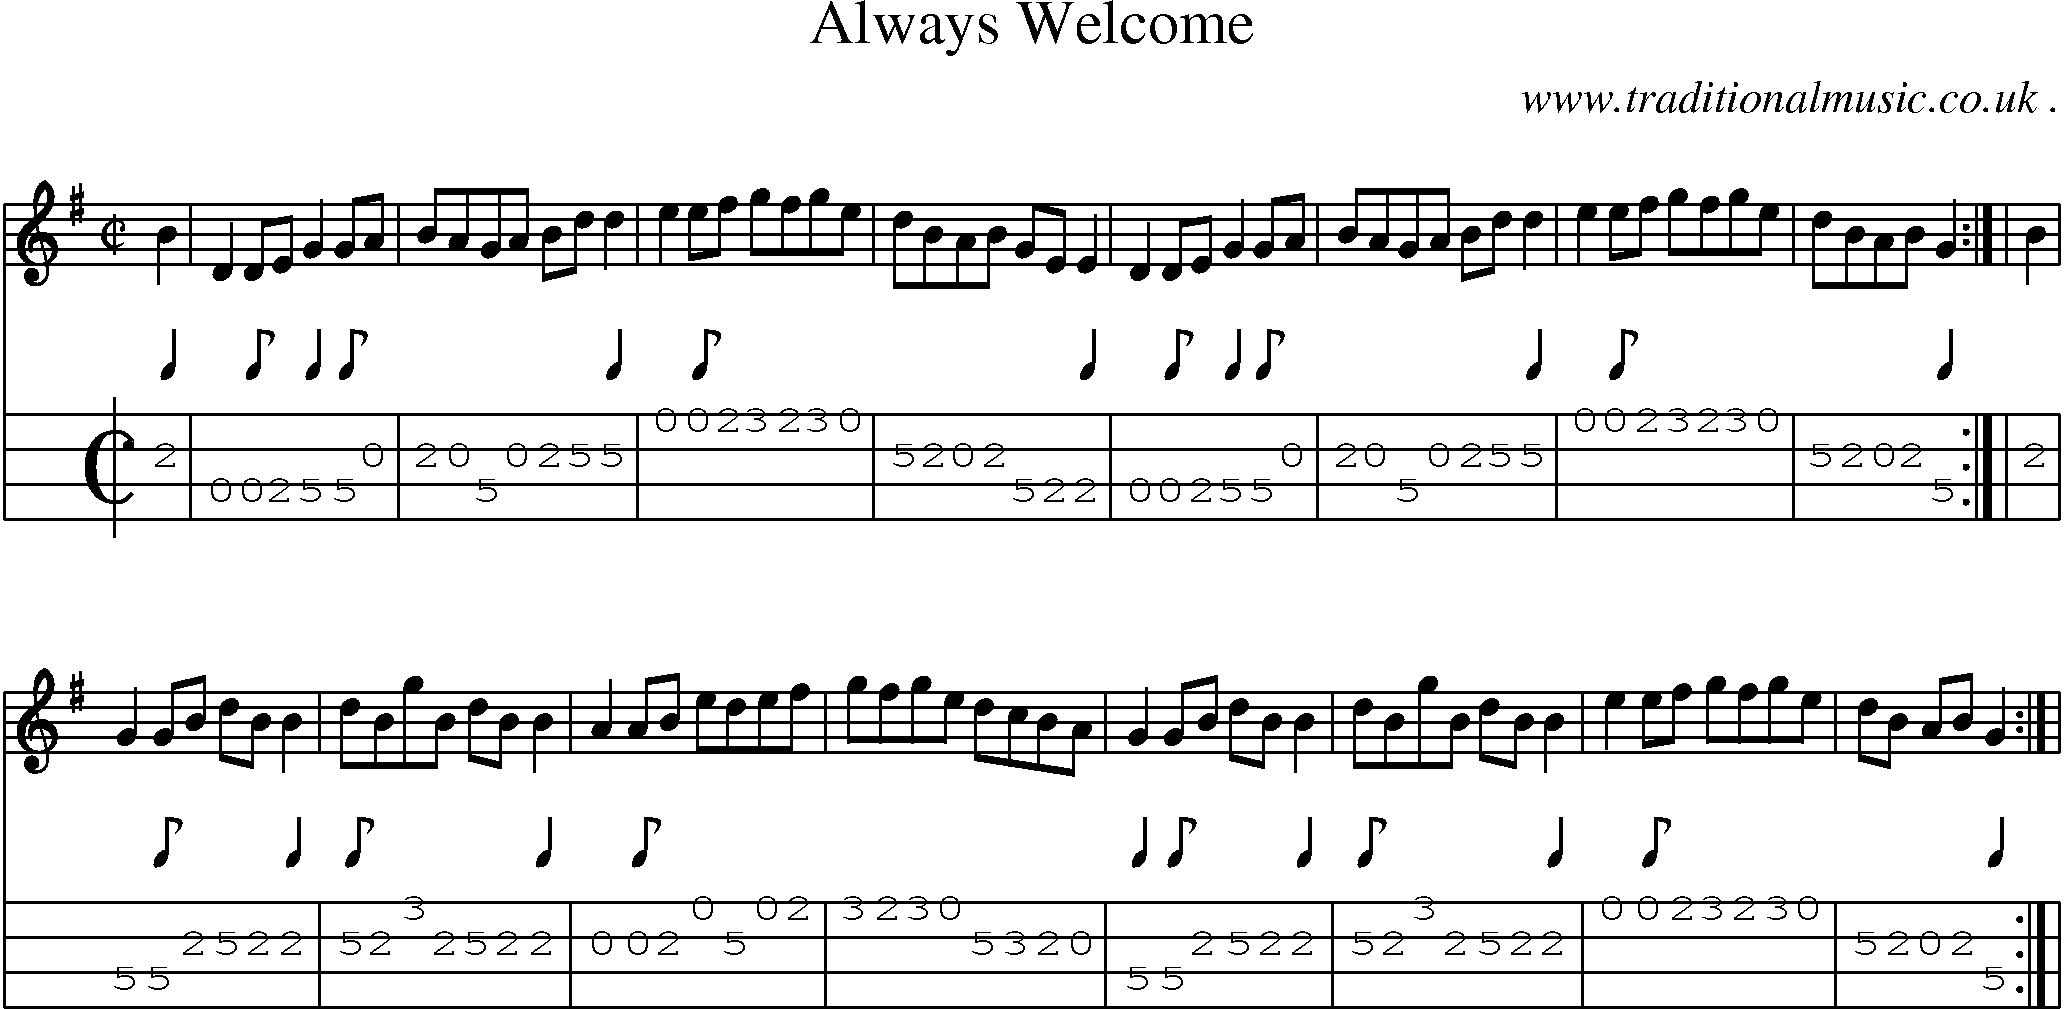 Sheet-music  score, Chords and Mandolin Tabs for Always Welcome